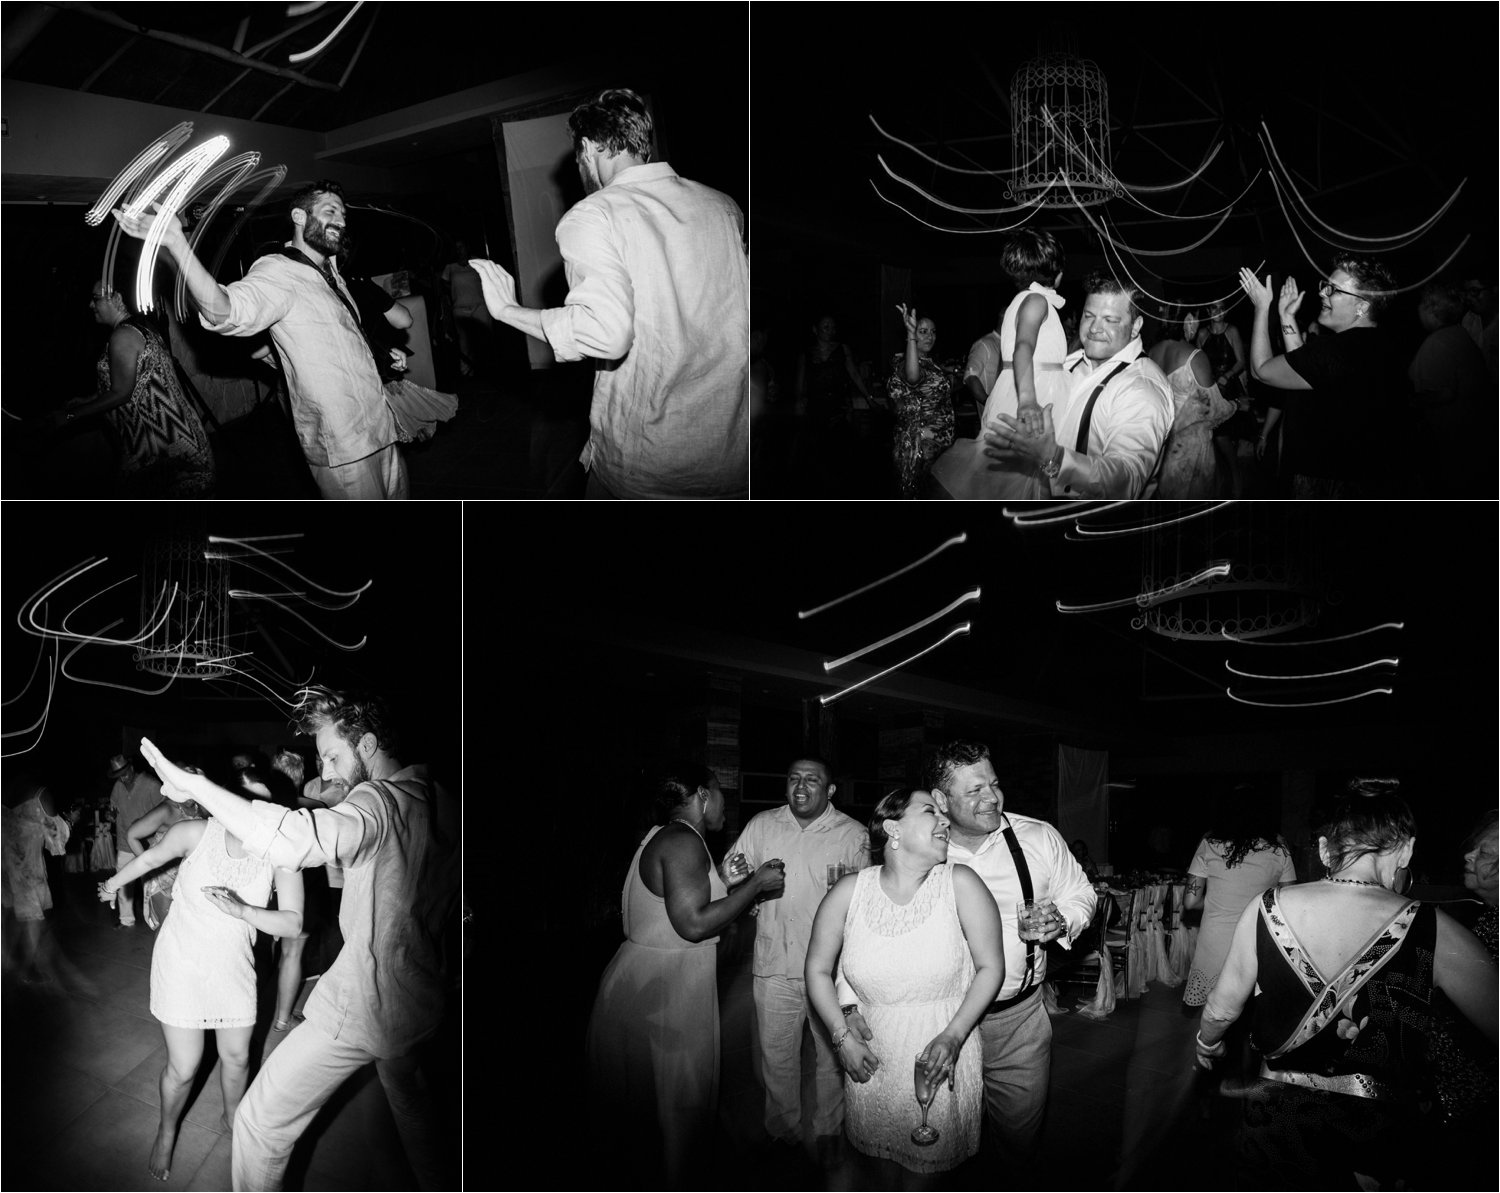  images by feliciathephotographer.com | destination wedding photographer | mexico | tropical | fiji | venue | azul beach resort | riviera maya | reception | dance floor | party | celebration | bride and groom | guests | friends and family | black and white | 